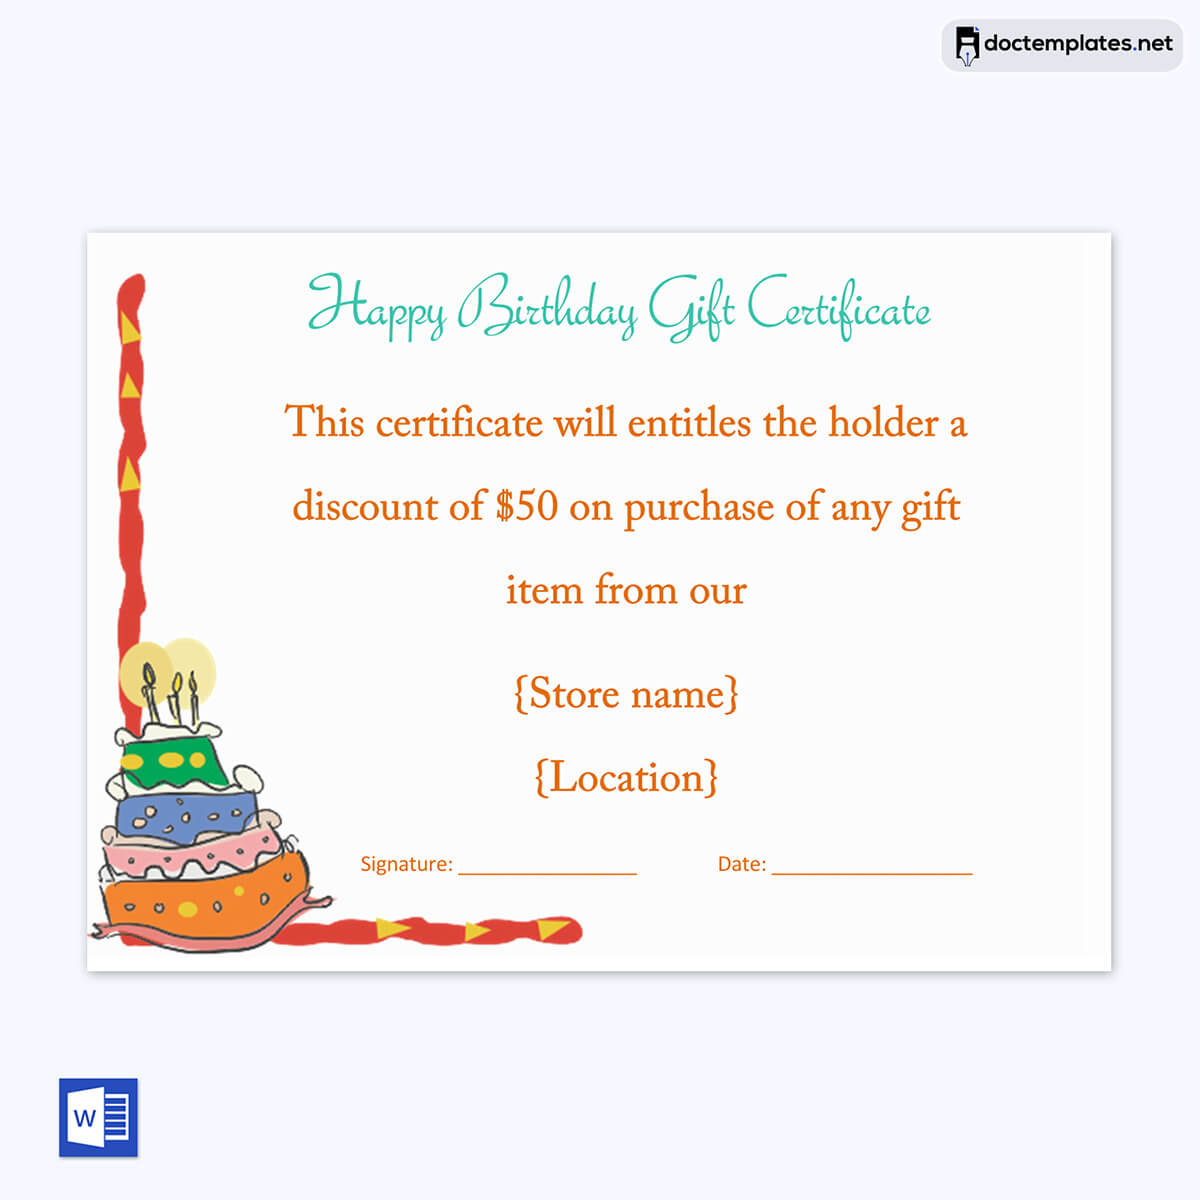 Colorful-Cake-Birthday-Gift-Certificate